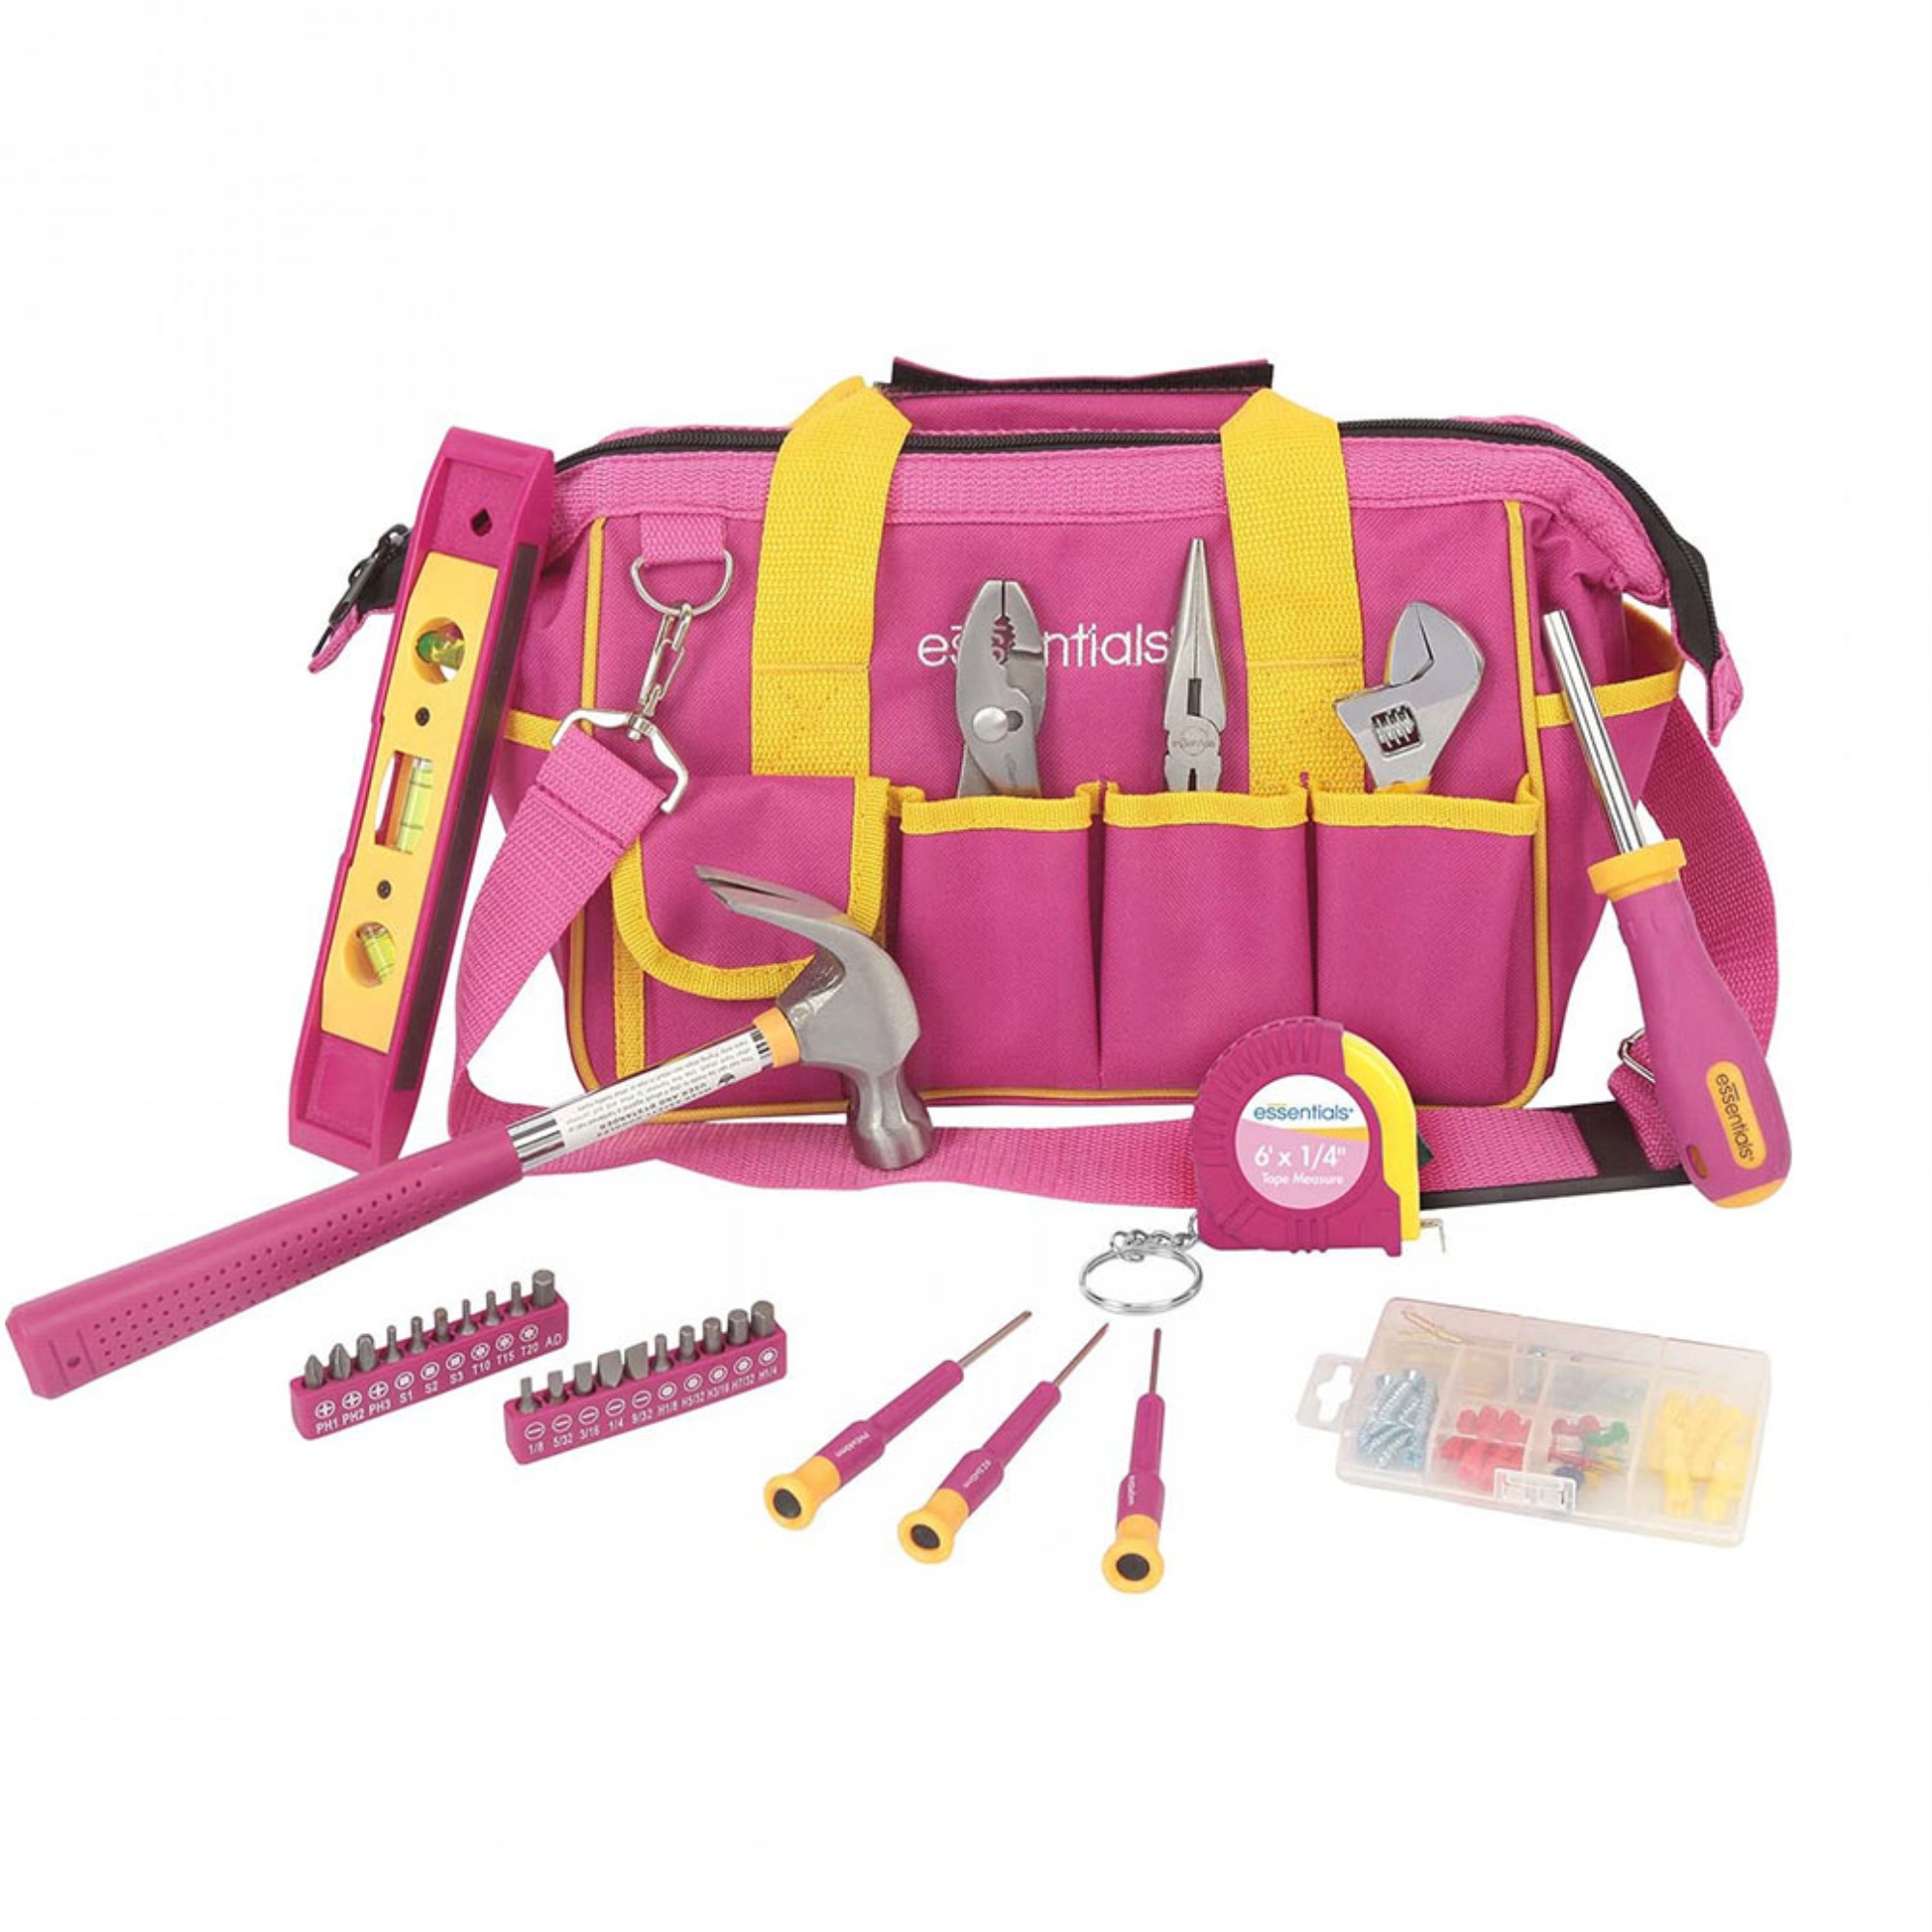 GREATNECK Great Neck 21043 32-Piece Essentials Around the House Tool Set in Pink Bag